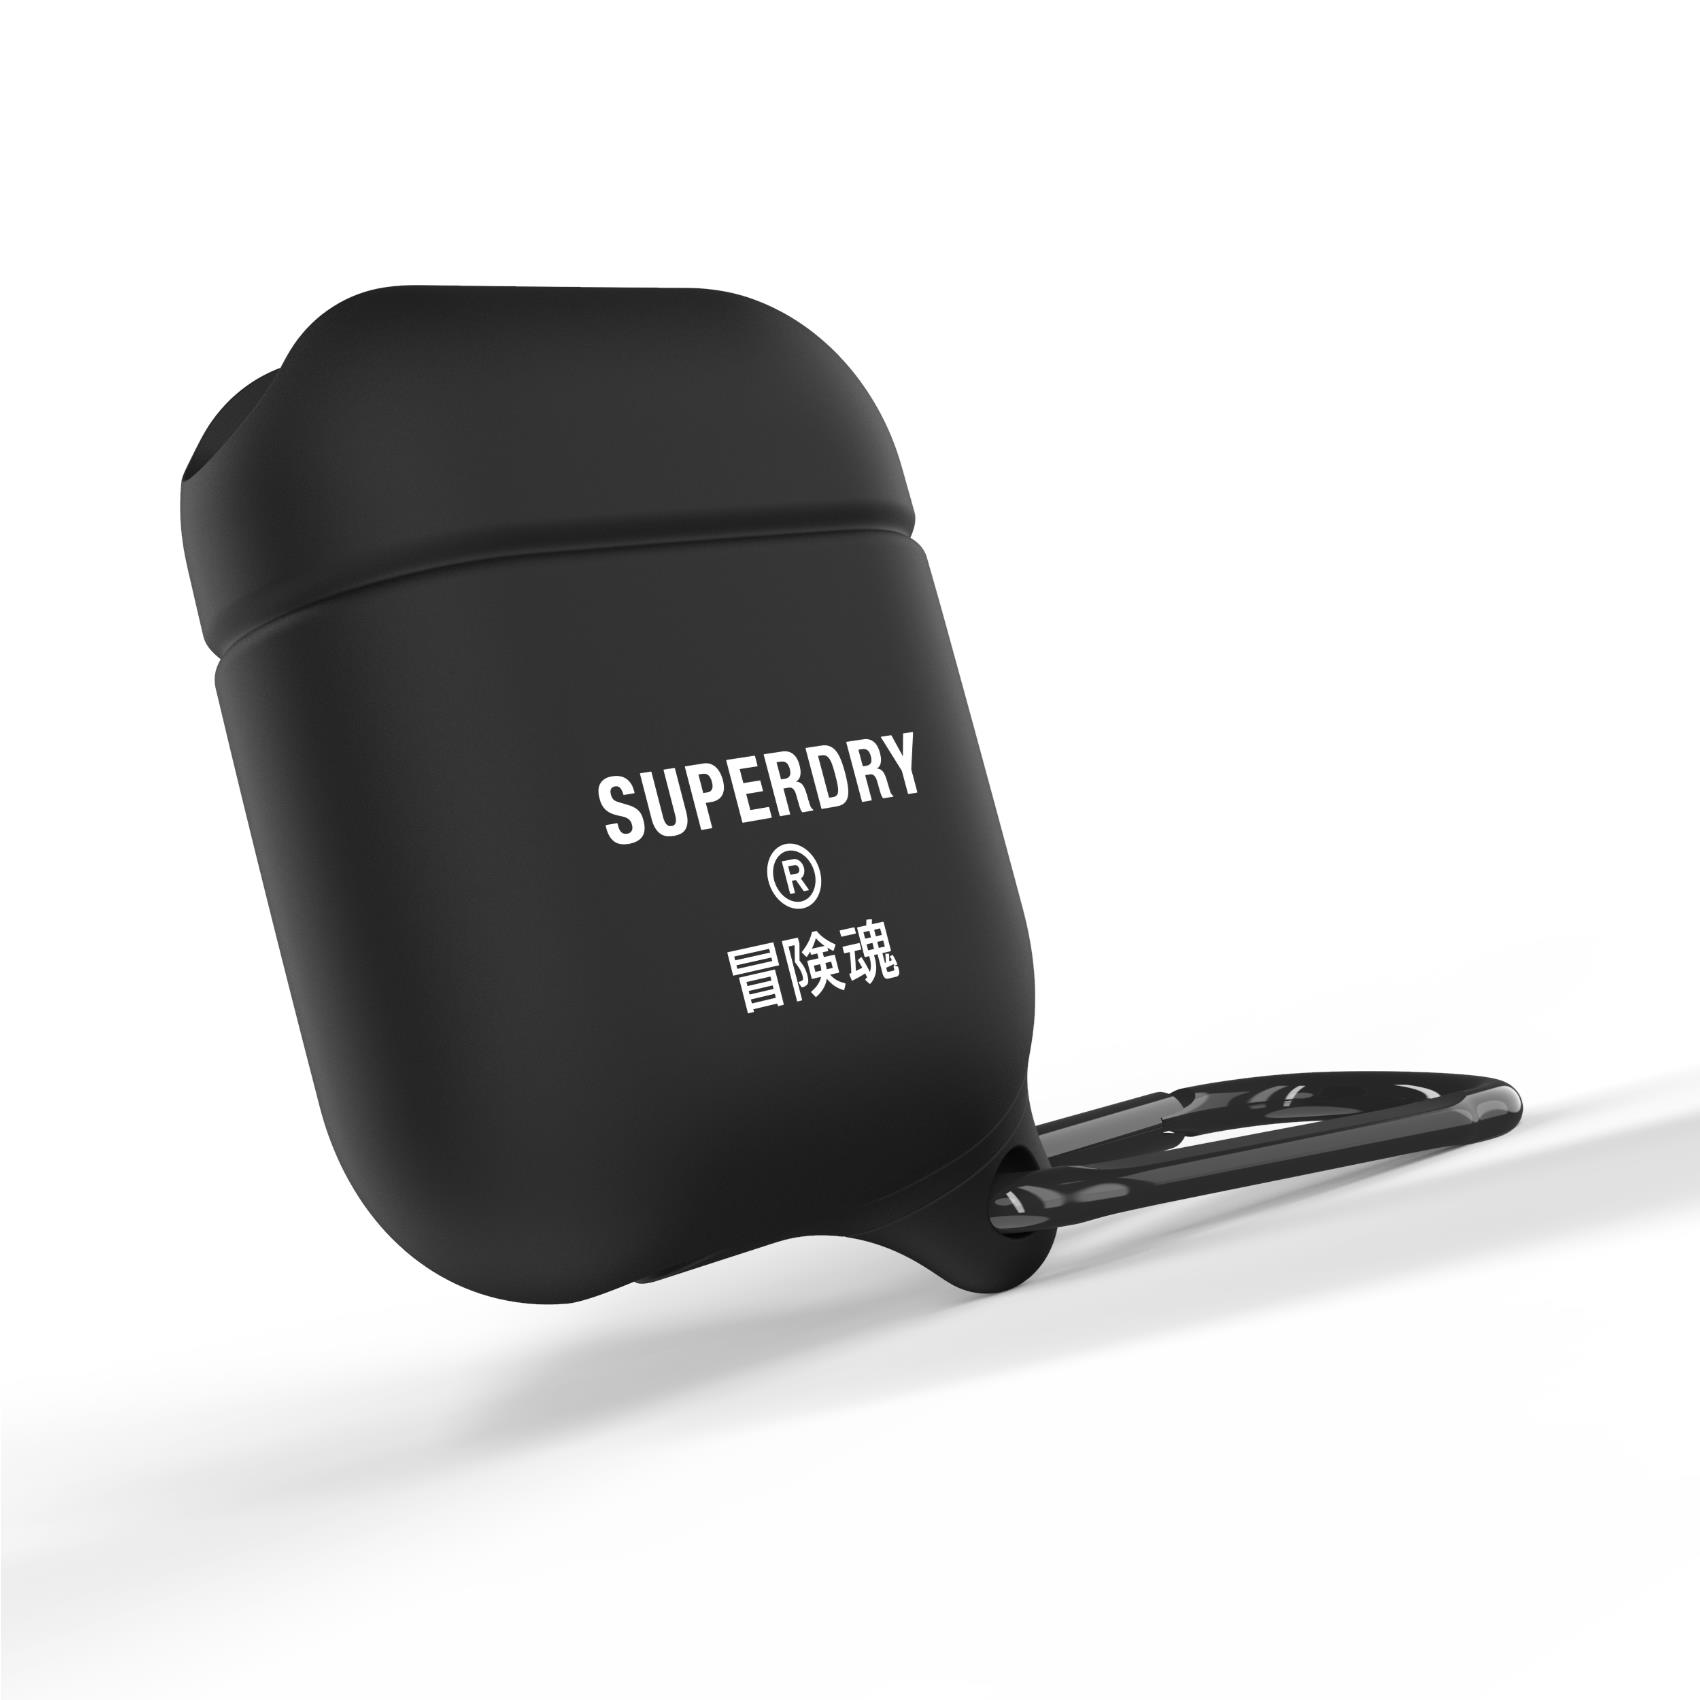 Superdry Airpod Cover Black Superdry 41692 8718846081085